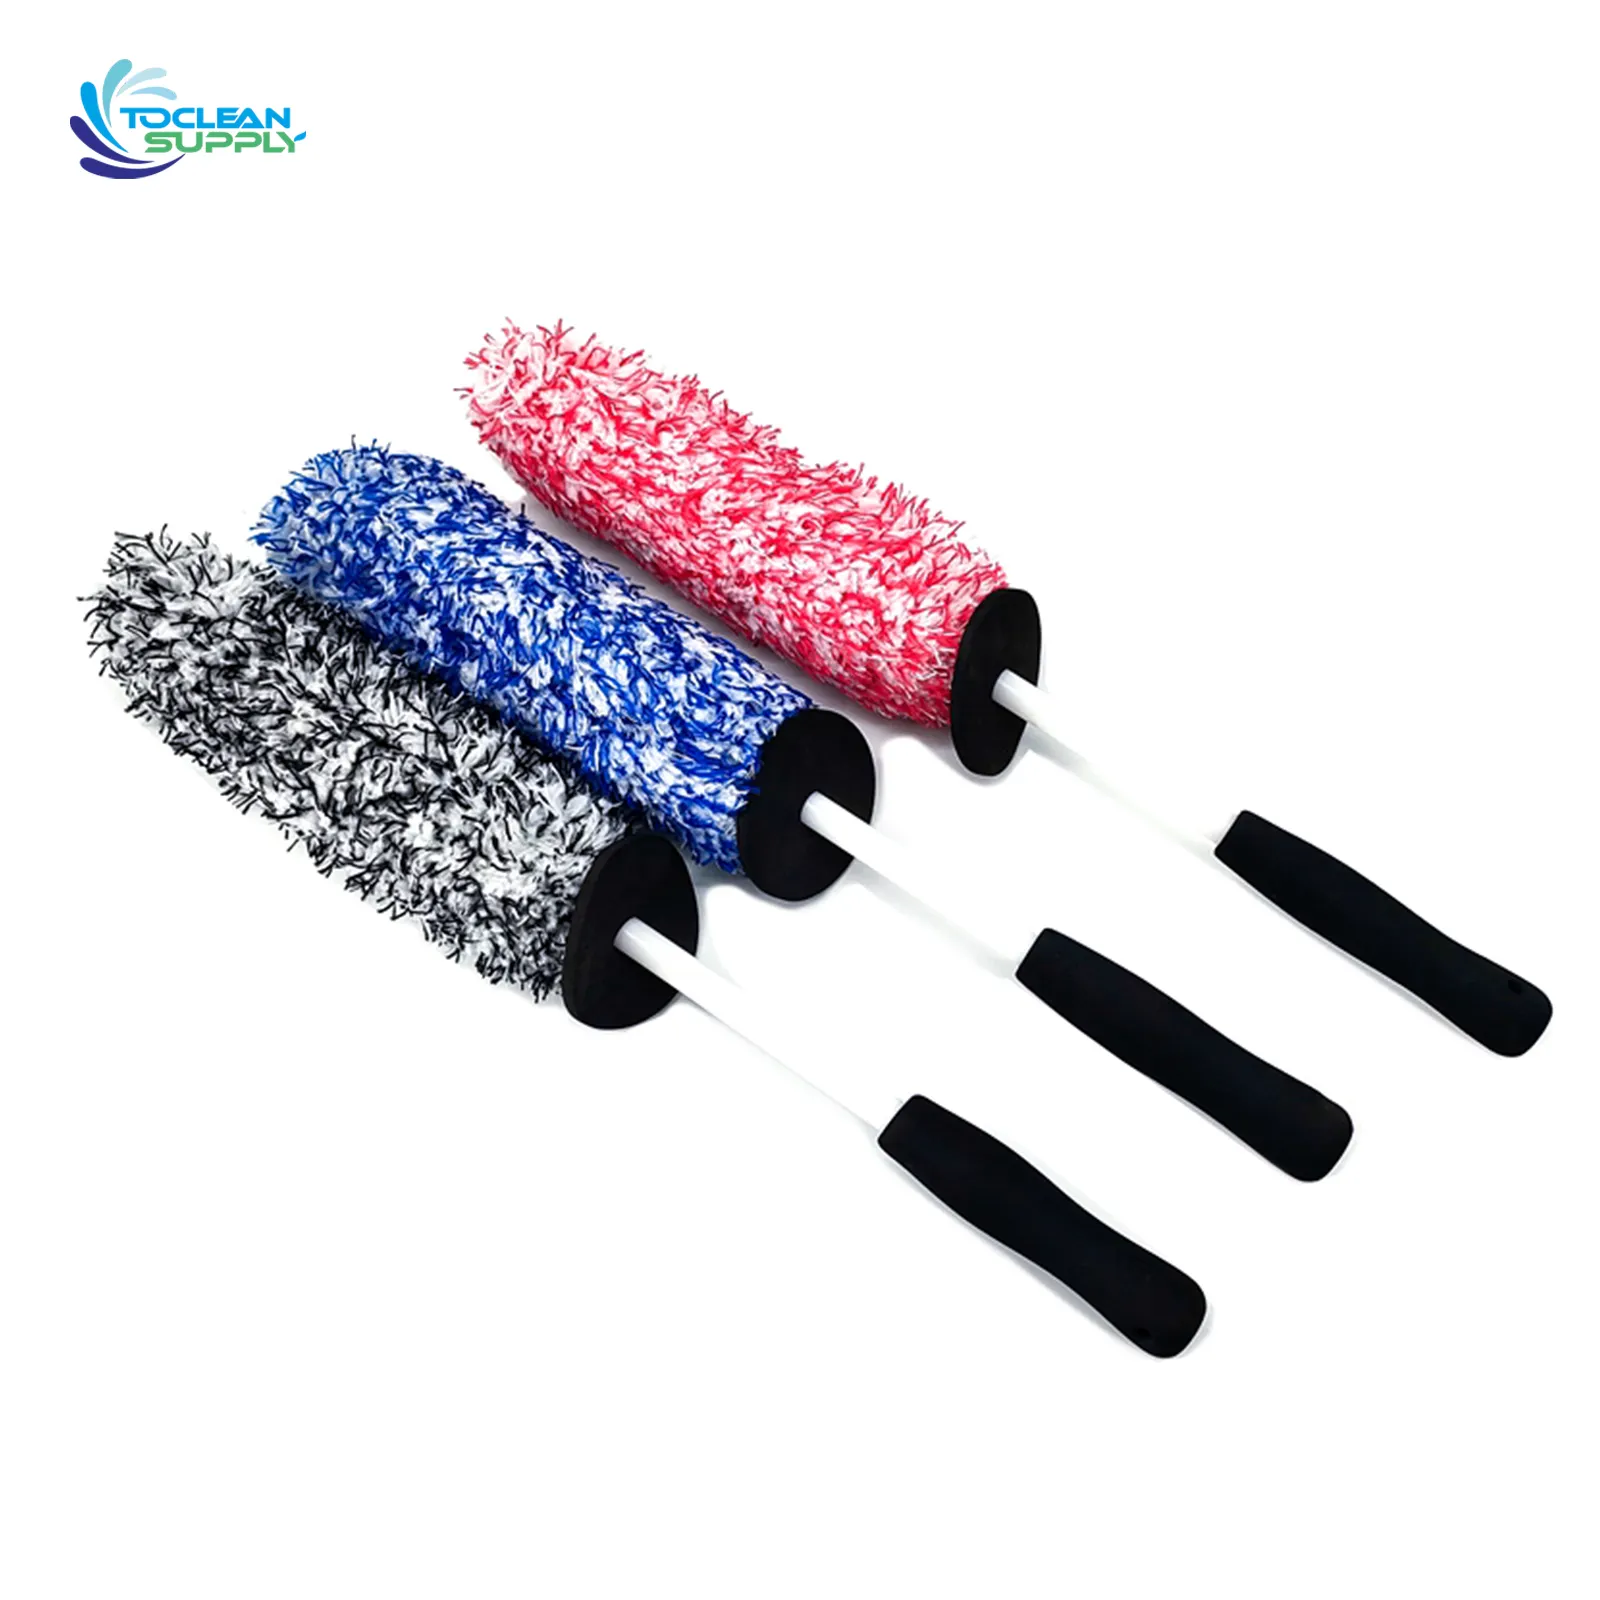 ultra soft car wheel detail cleaning kit brushes auto tire wash detailing carwash tyre brushes set with long handle for cars